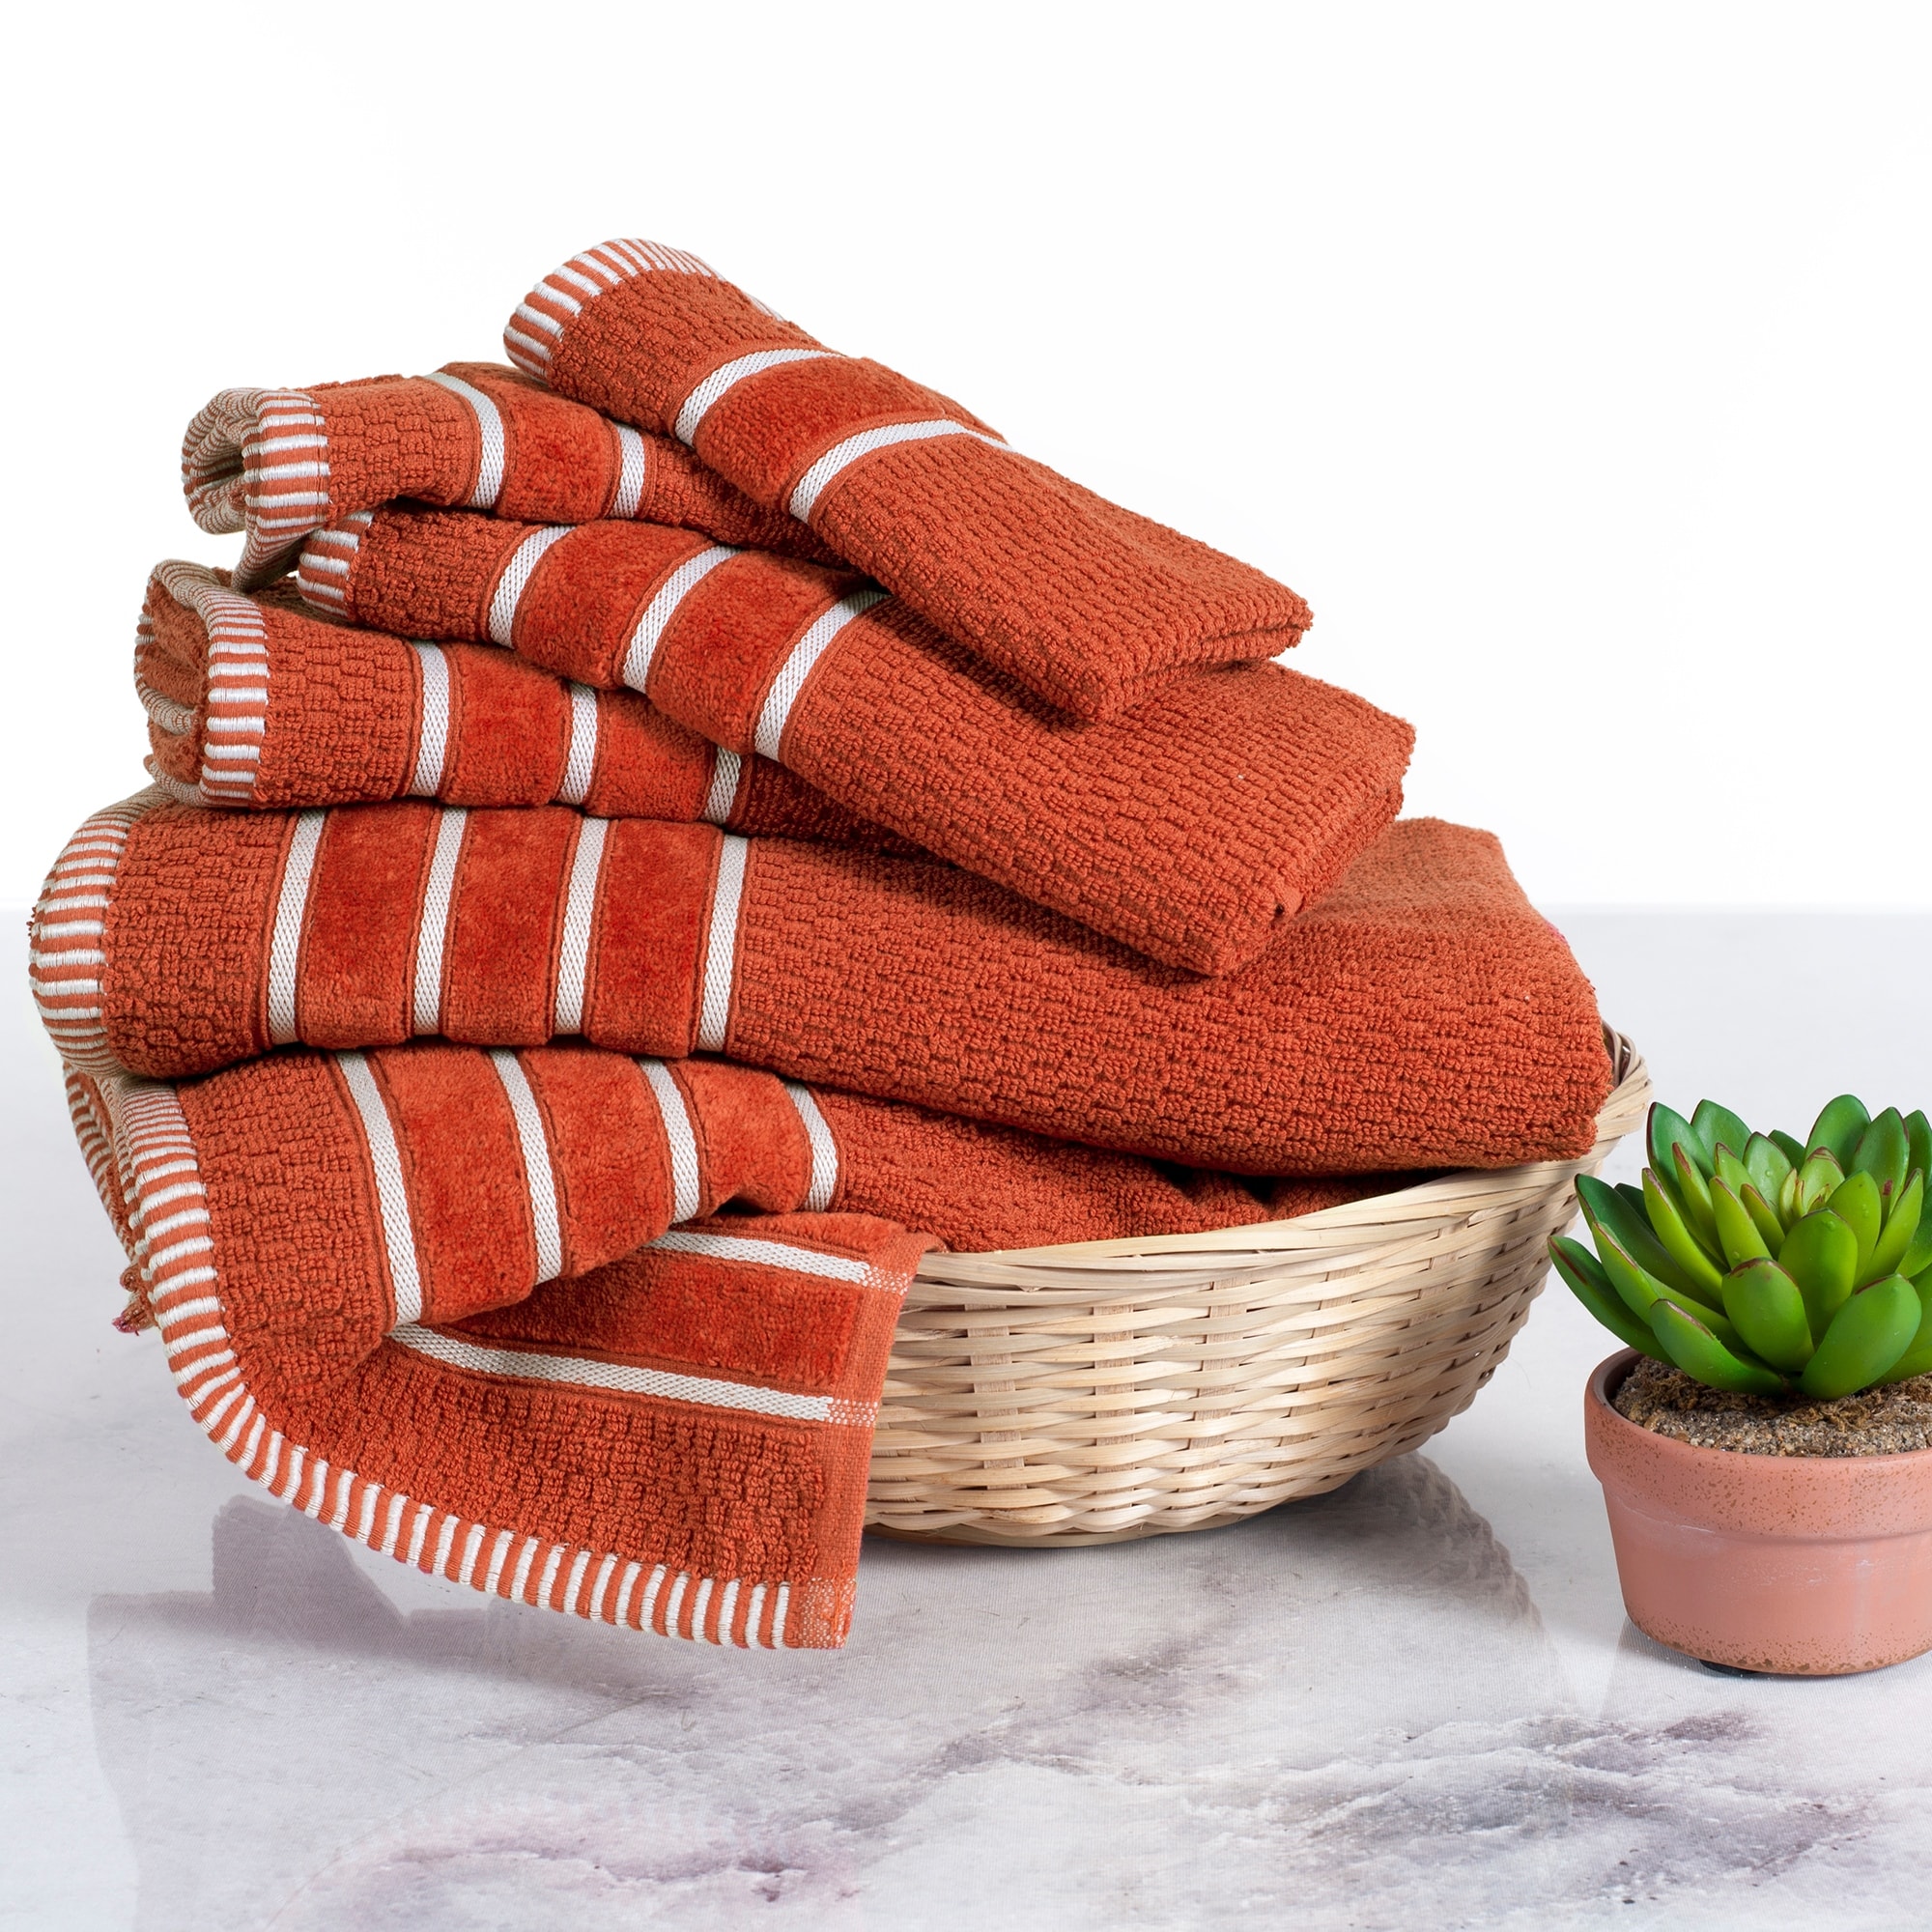 https://ak1.ostkcdn.com/images/products/is/images/direct/0f0a5eba7bc7740a83accf22a5218797f81d0e84/6-Piece-Washable-Bathroom-Towel-Set-with-Rice-Weave---2-Bath-Sheets%2C-2-Hand-Towels%2C-and-2-Washcloths-by-Lavish-Home-%28Brick%29.jpg